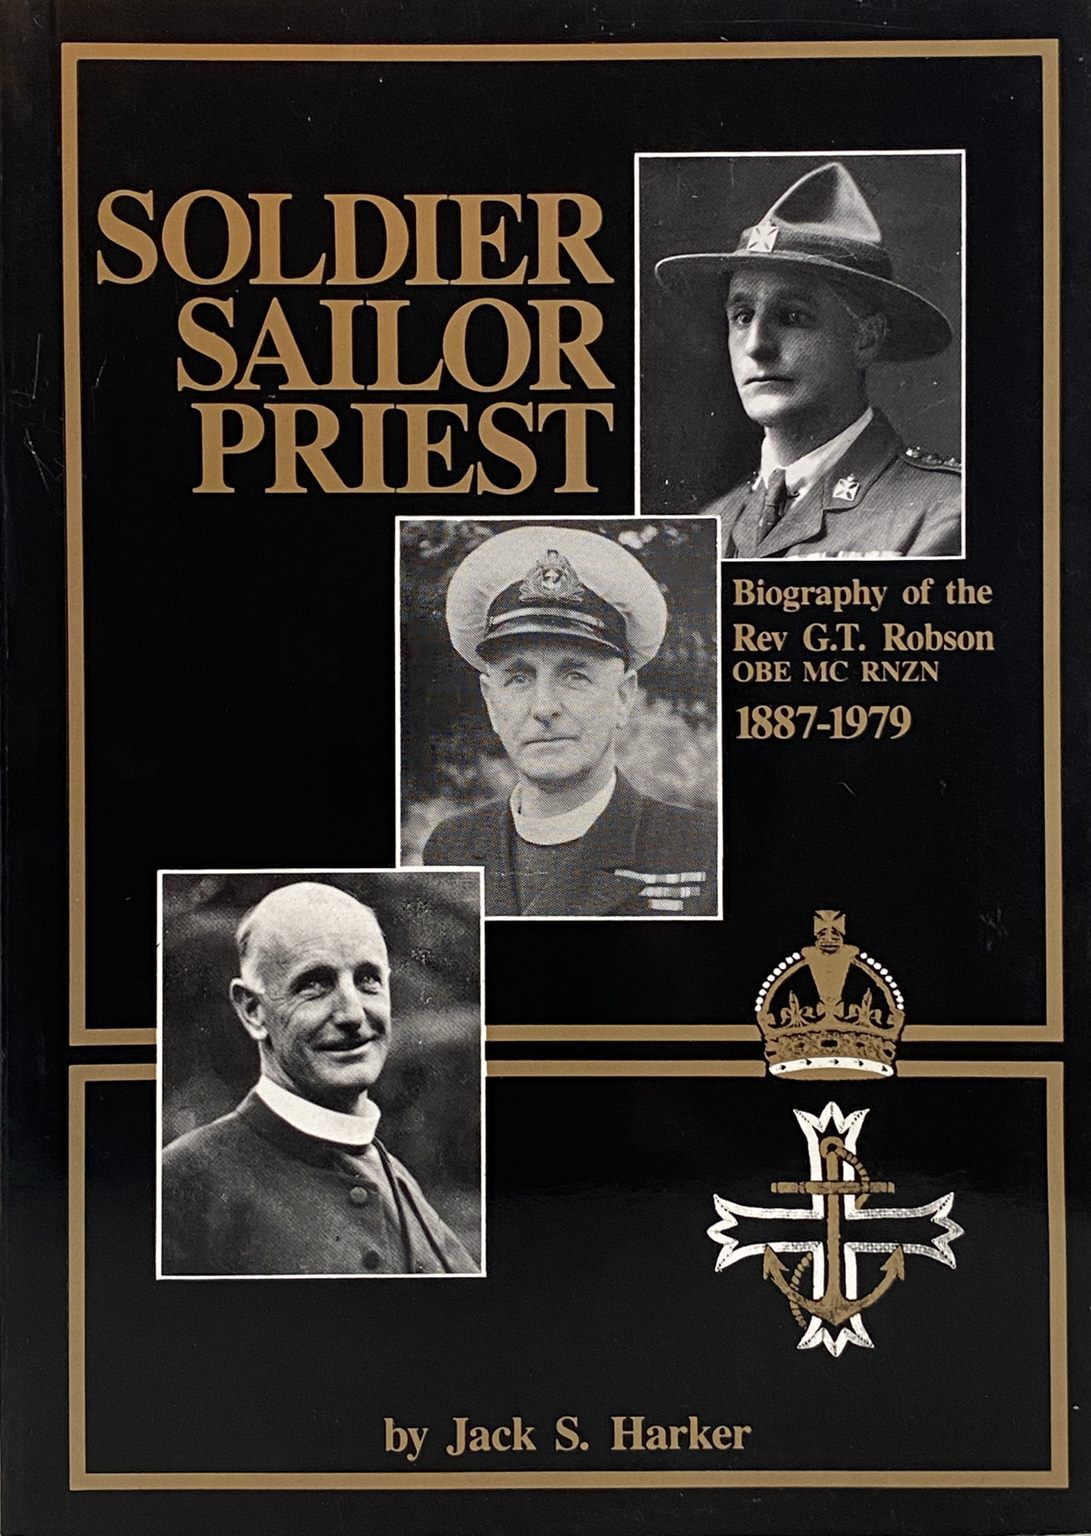 SOLDIER, SAILOR, PRIEST: Biography of Rev G.T. Robson 1887-1979